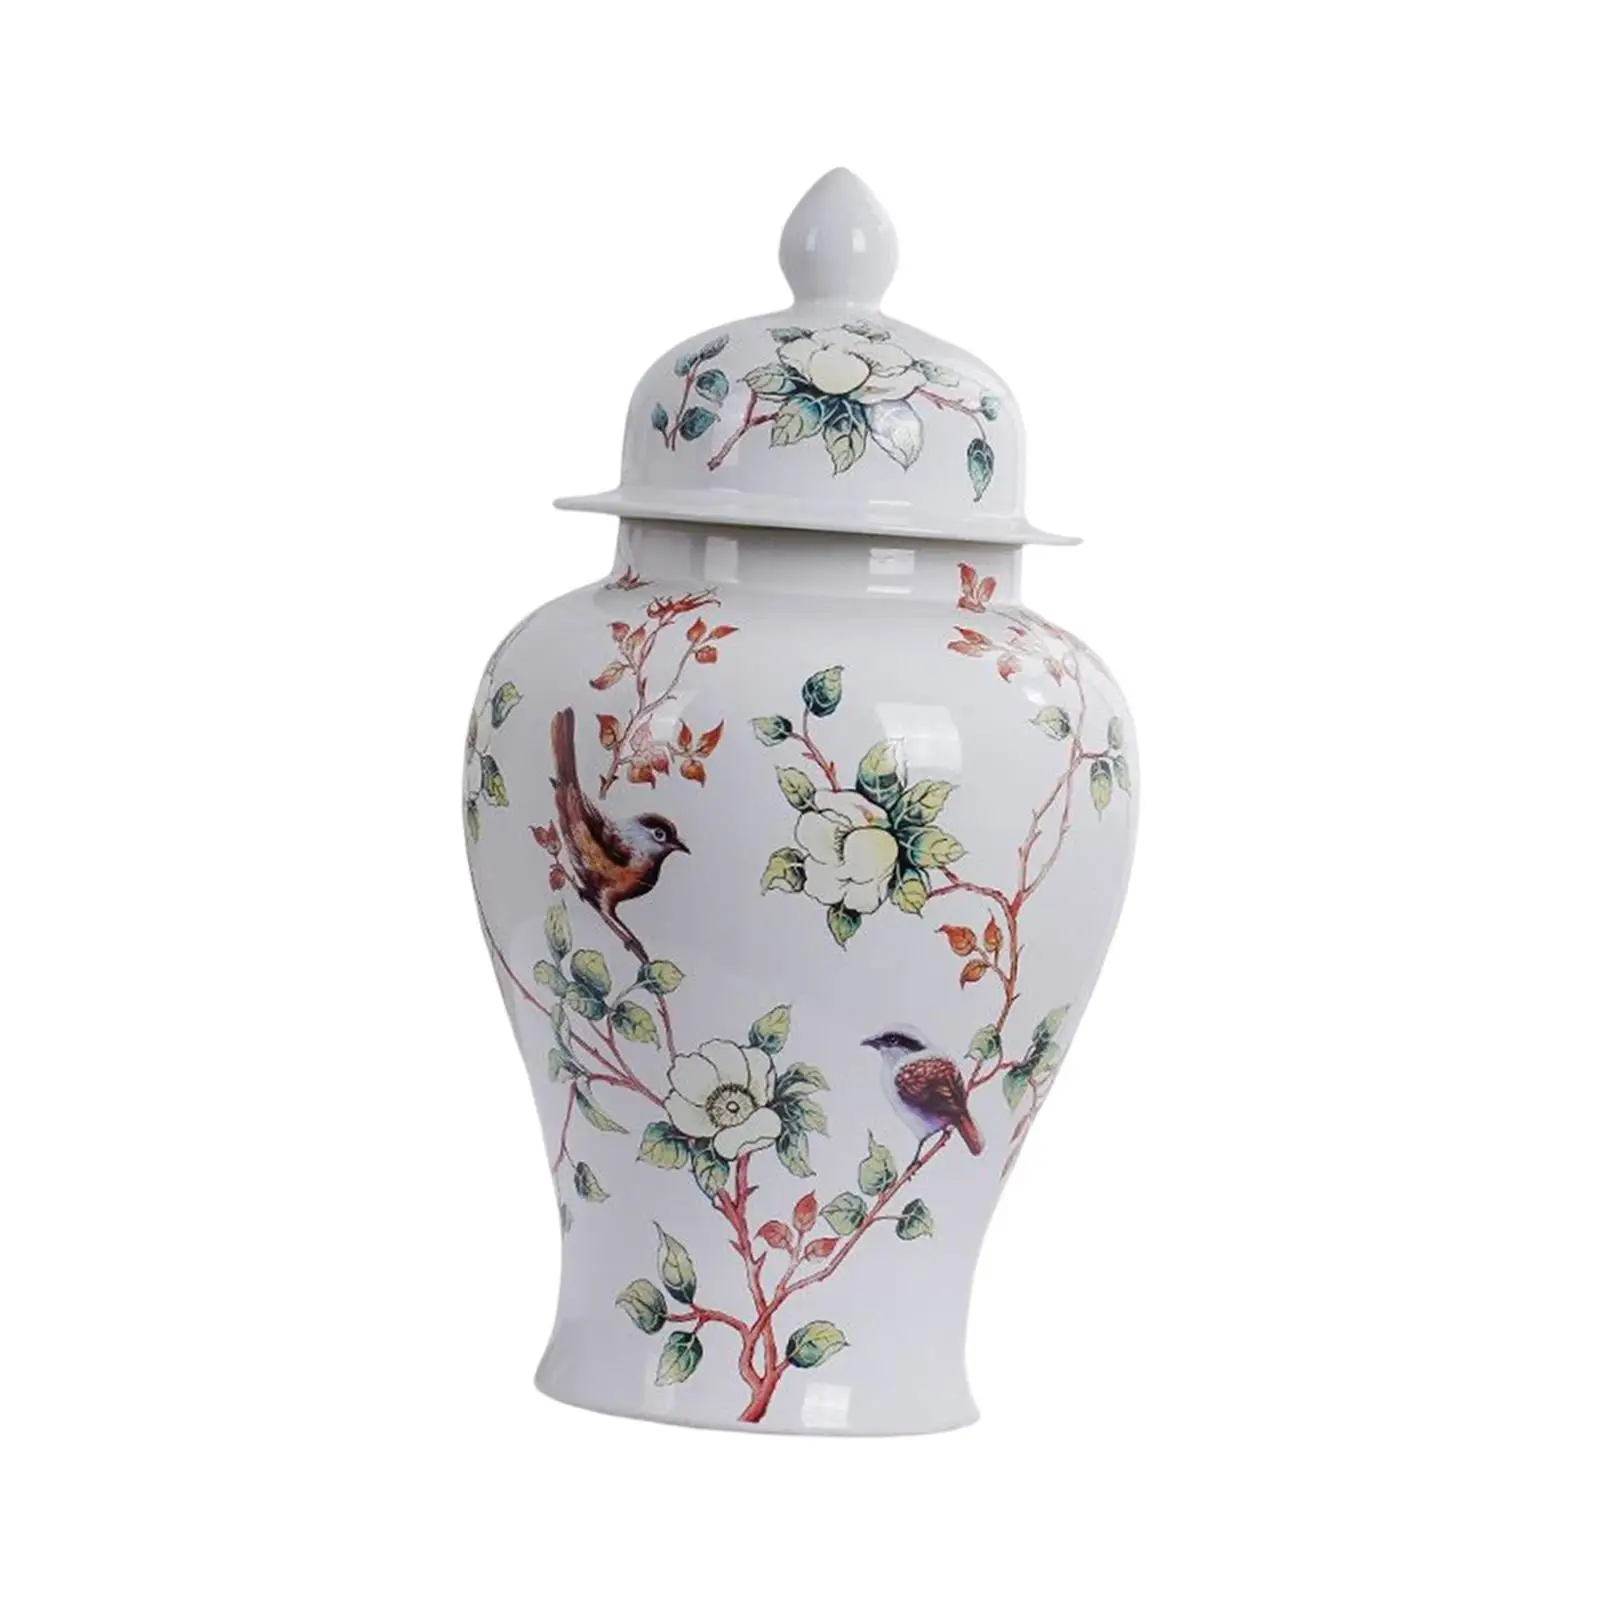 Porcelain Temple Jar Vase Decorative with Lid Tall Ornaments Ceramic Ginger Jar for Home Living Room Entryway Fireplace